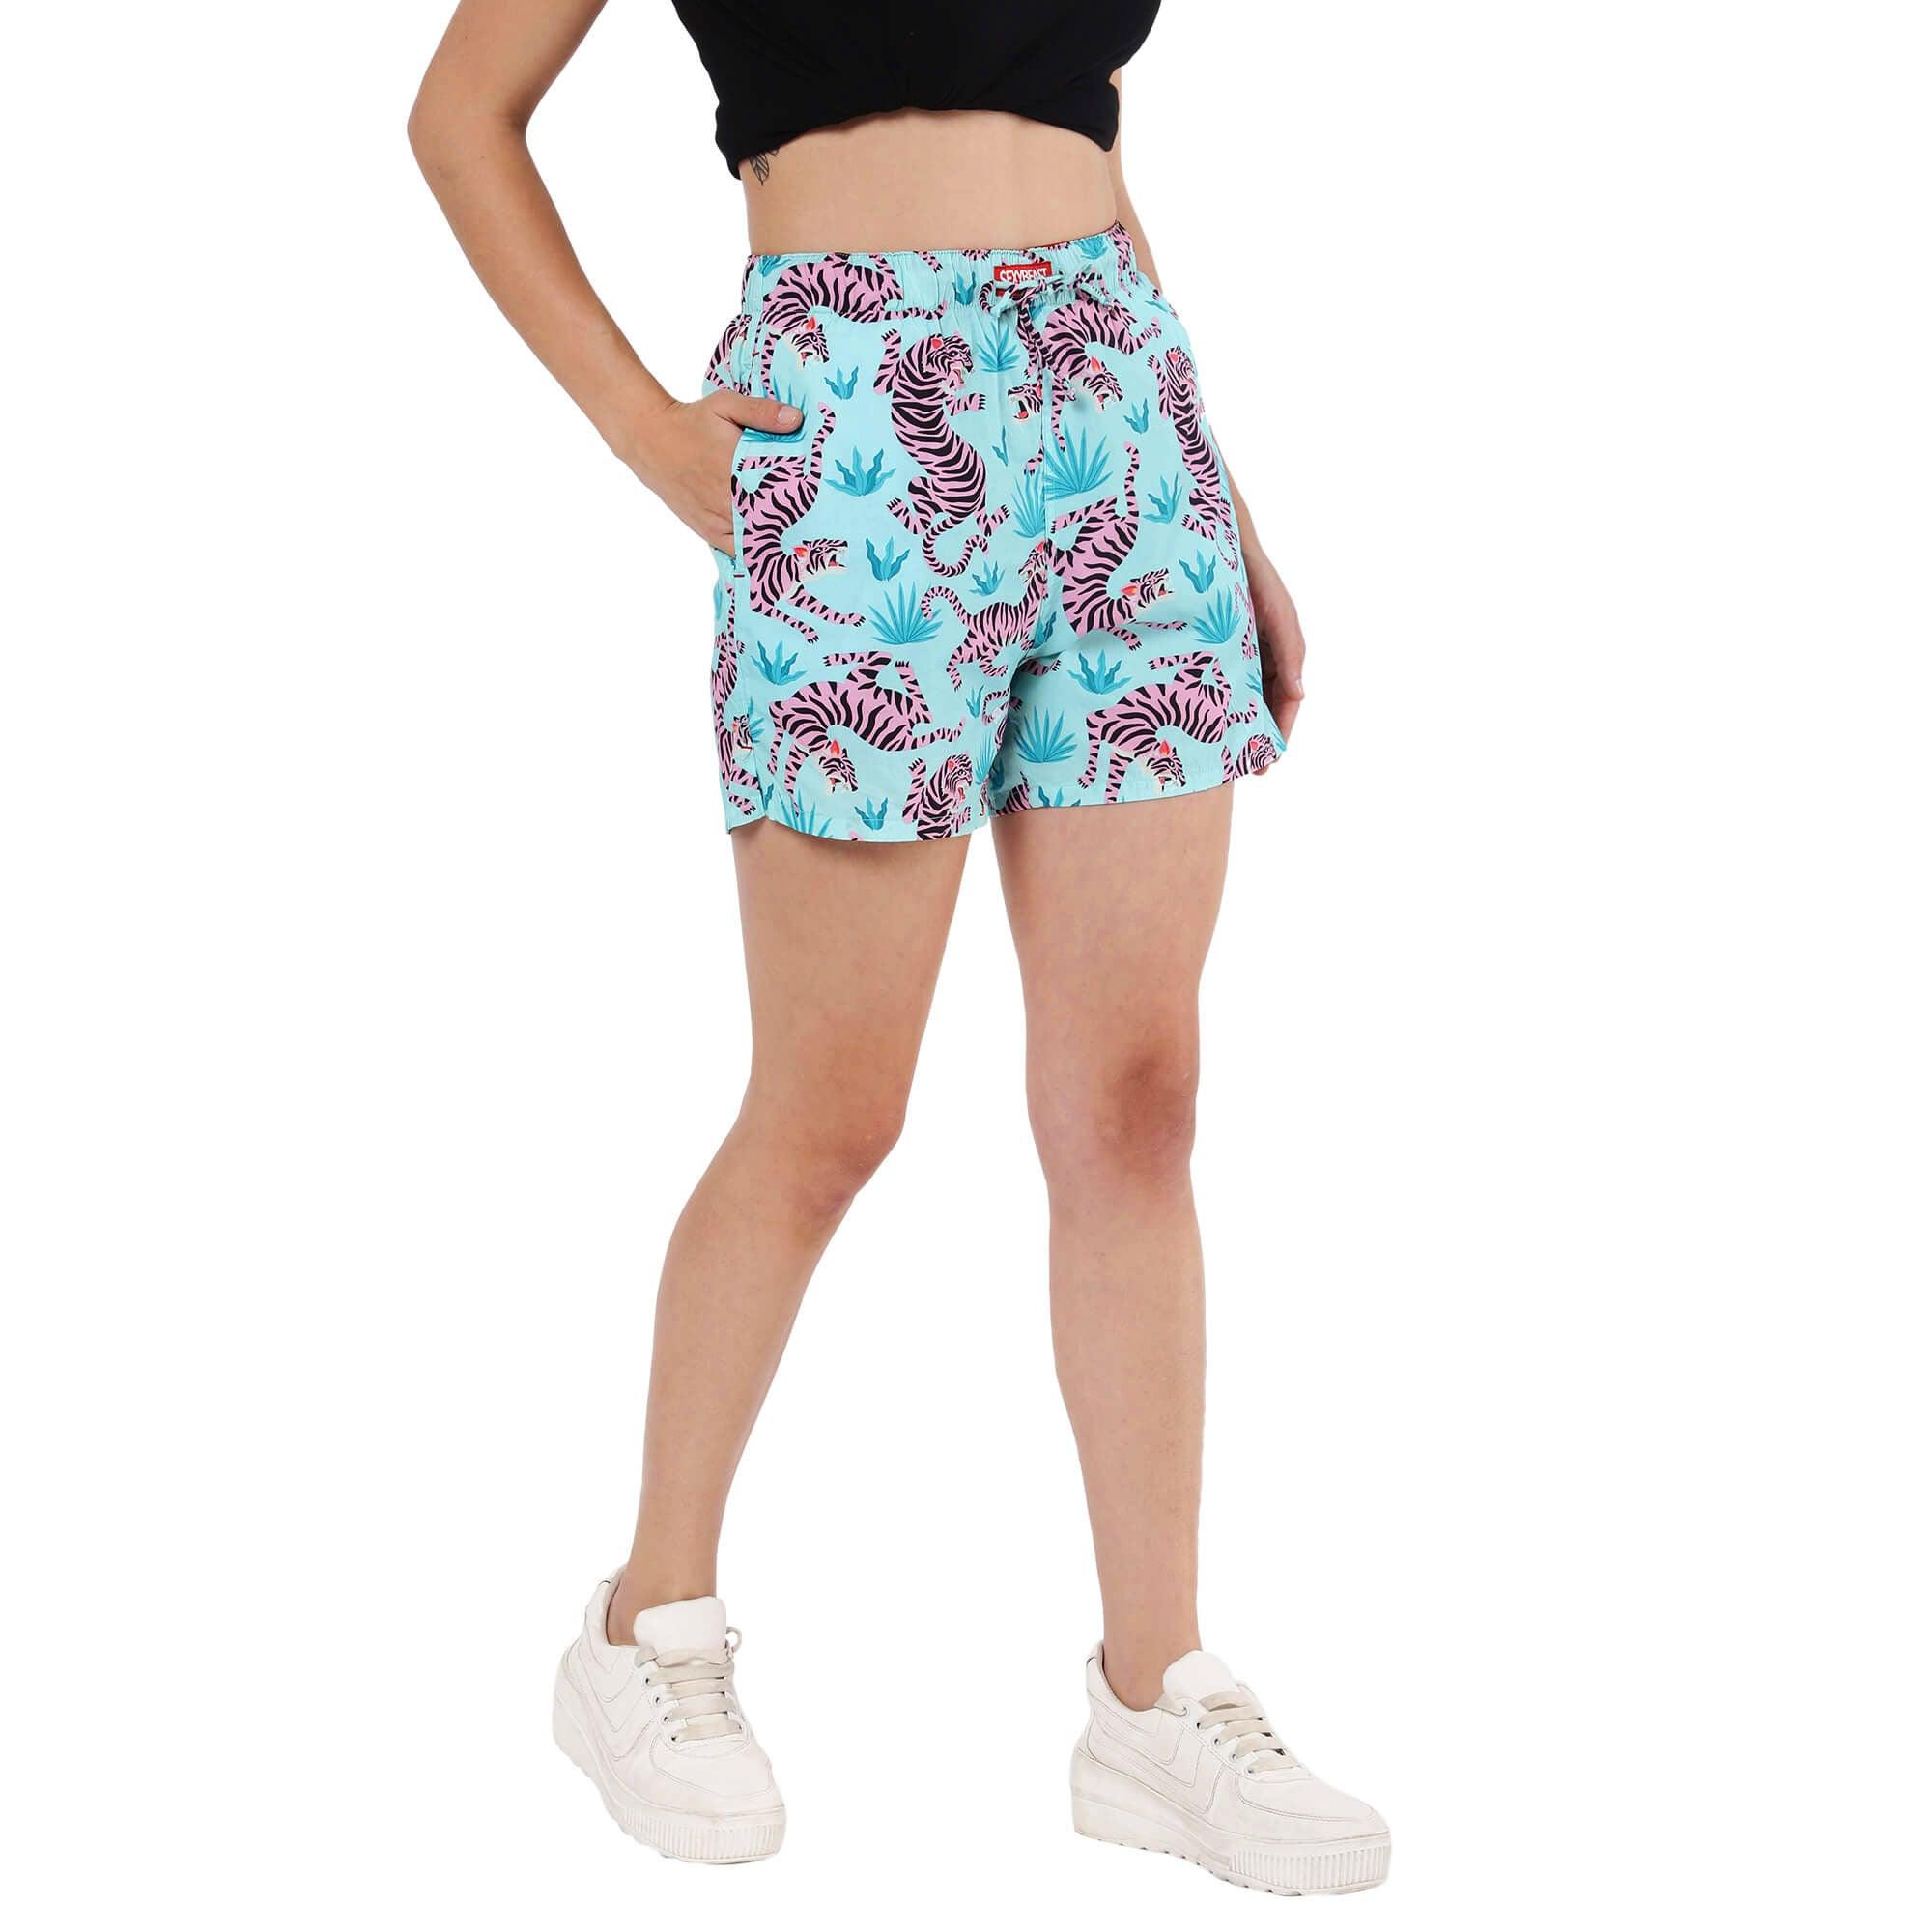 Pink Tigers Boxer Shorts For Women